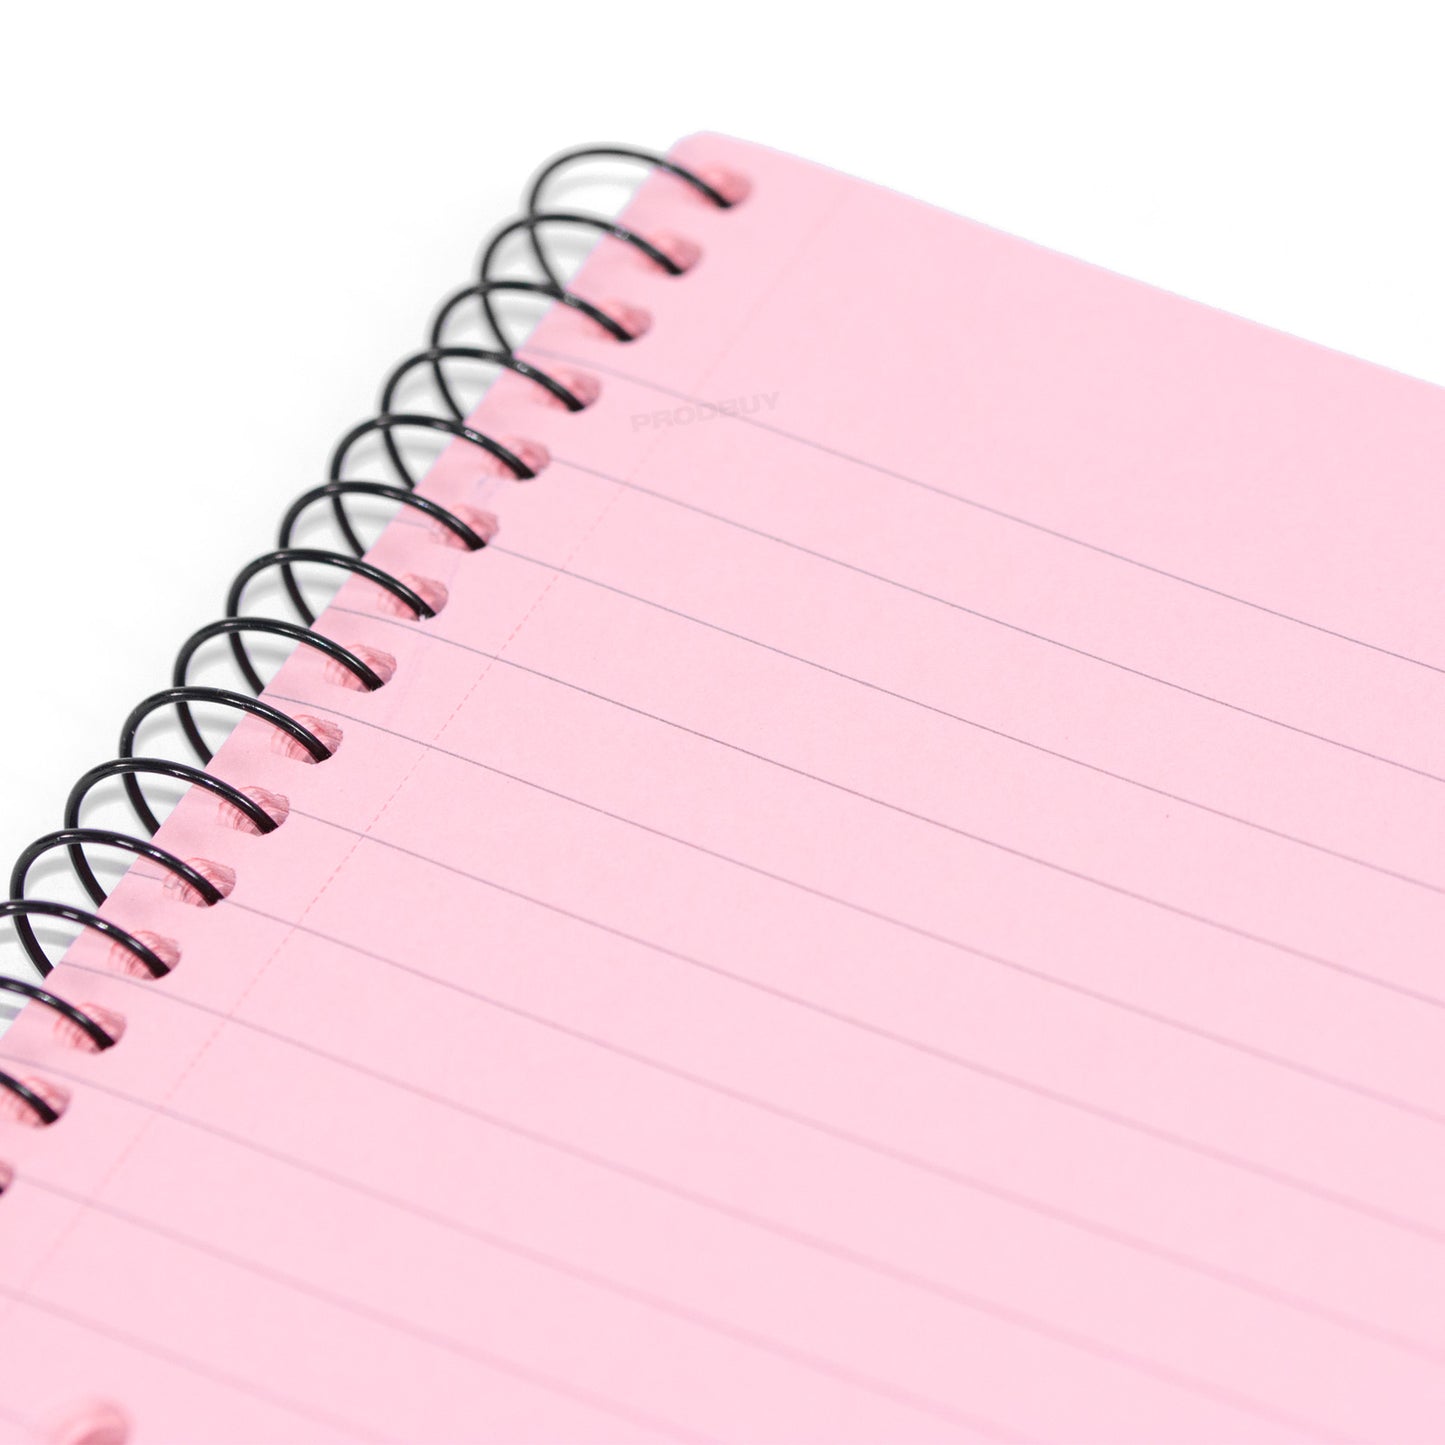 Set of 3 Pink Lined A4 Memory Paper Notepads with Side Spiral